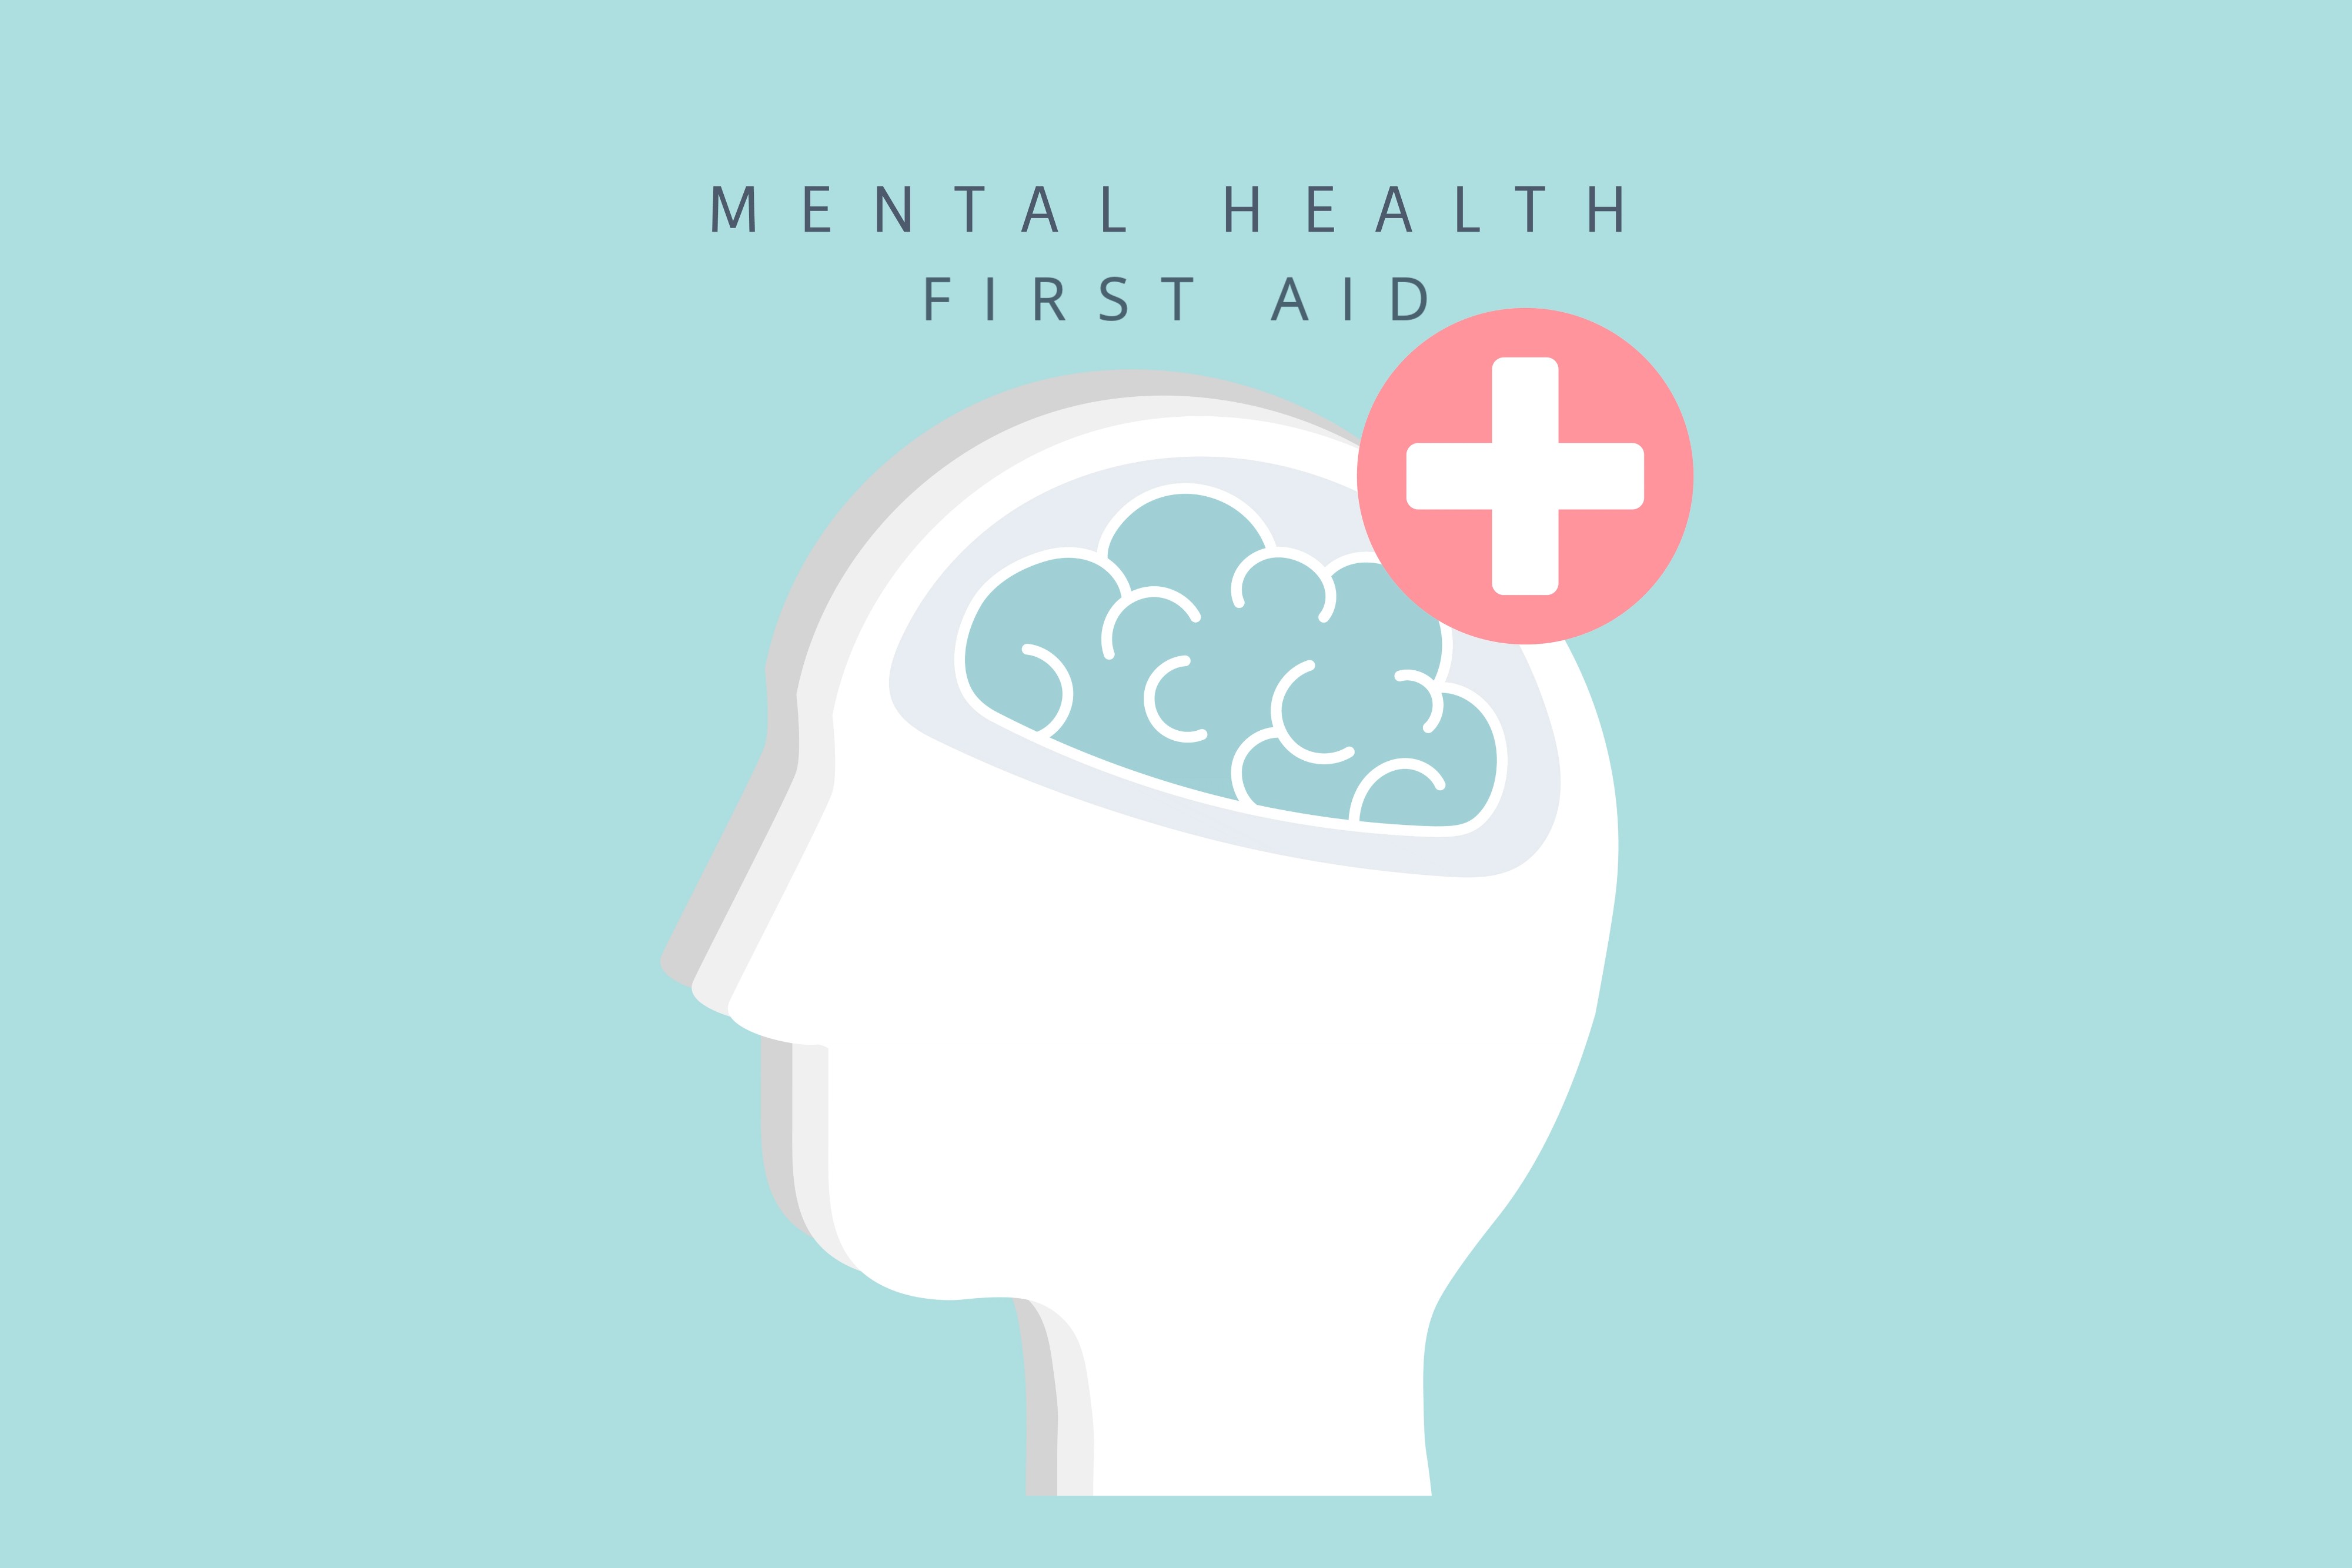 Mental Health First Aid Blended Face-to-Face Course